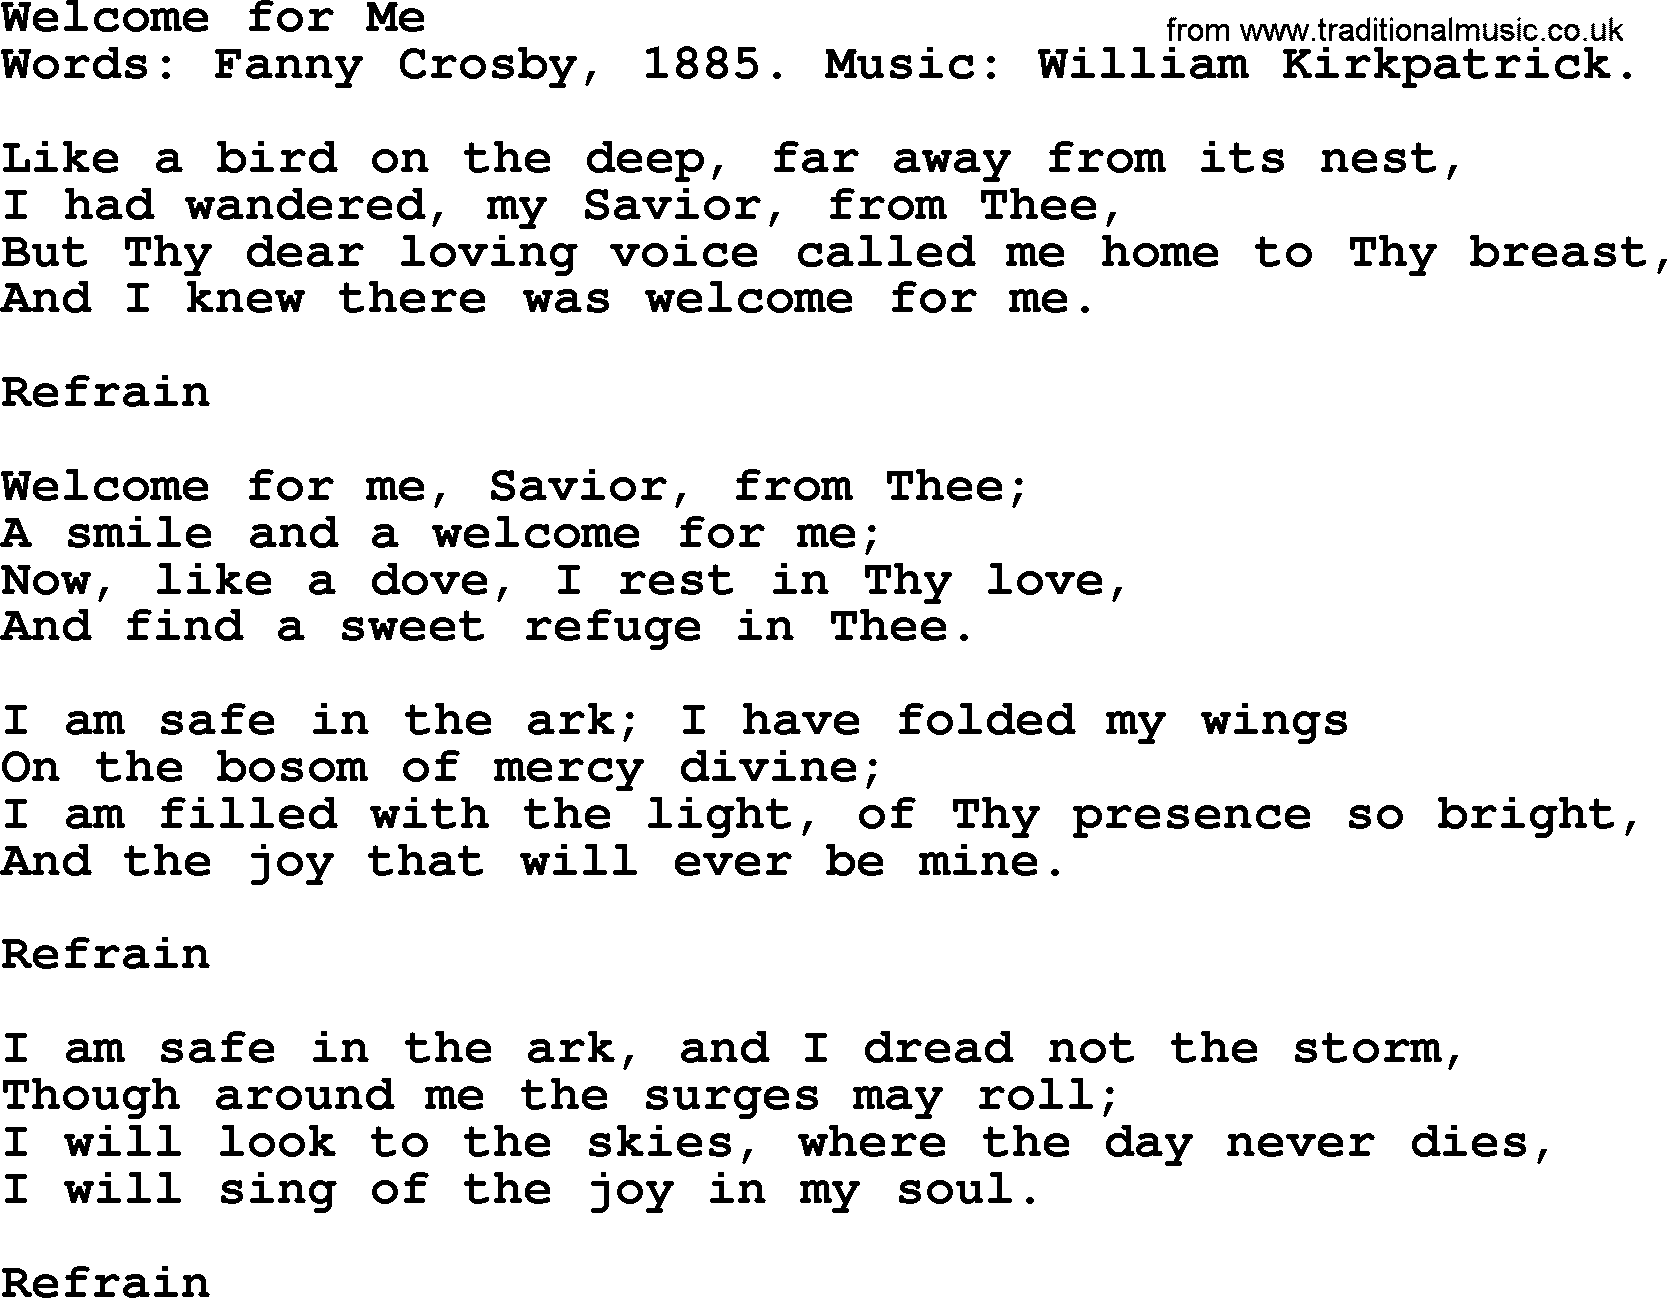 Fanny Crosby song: Welcome For Me, lyrics